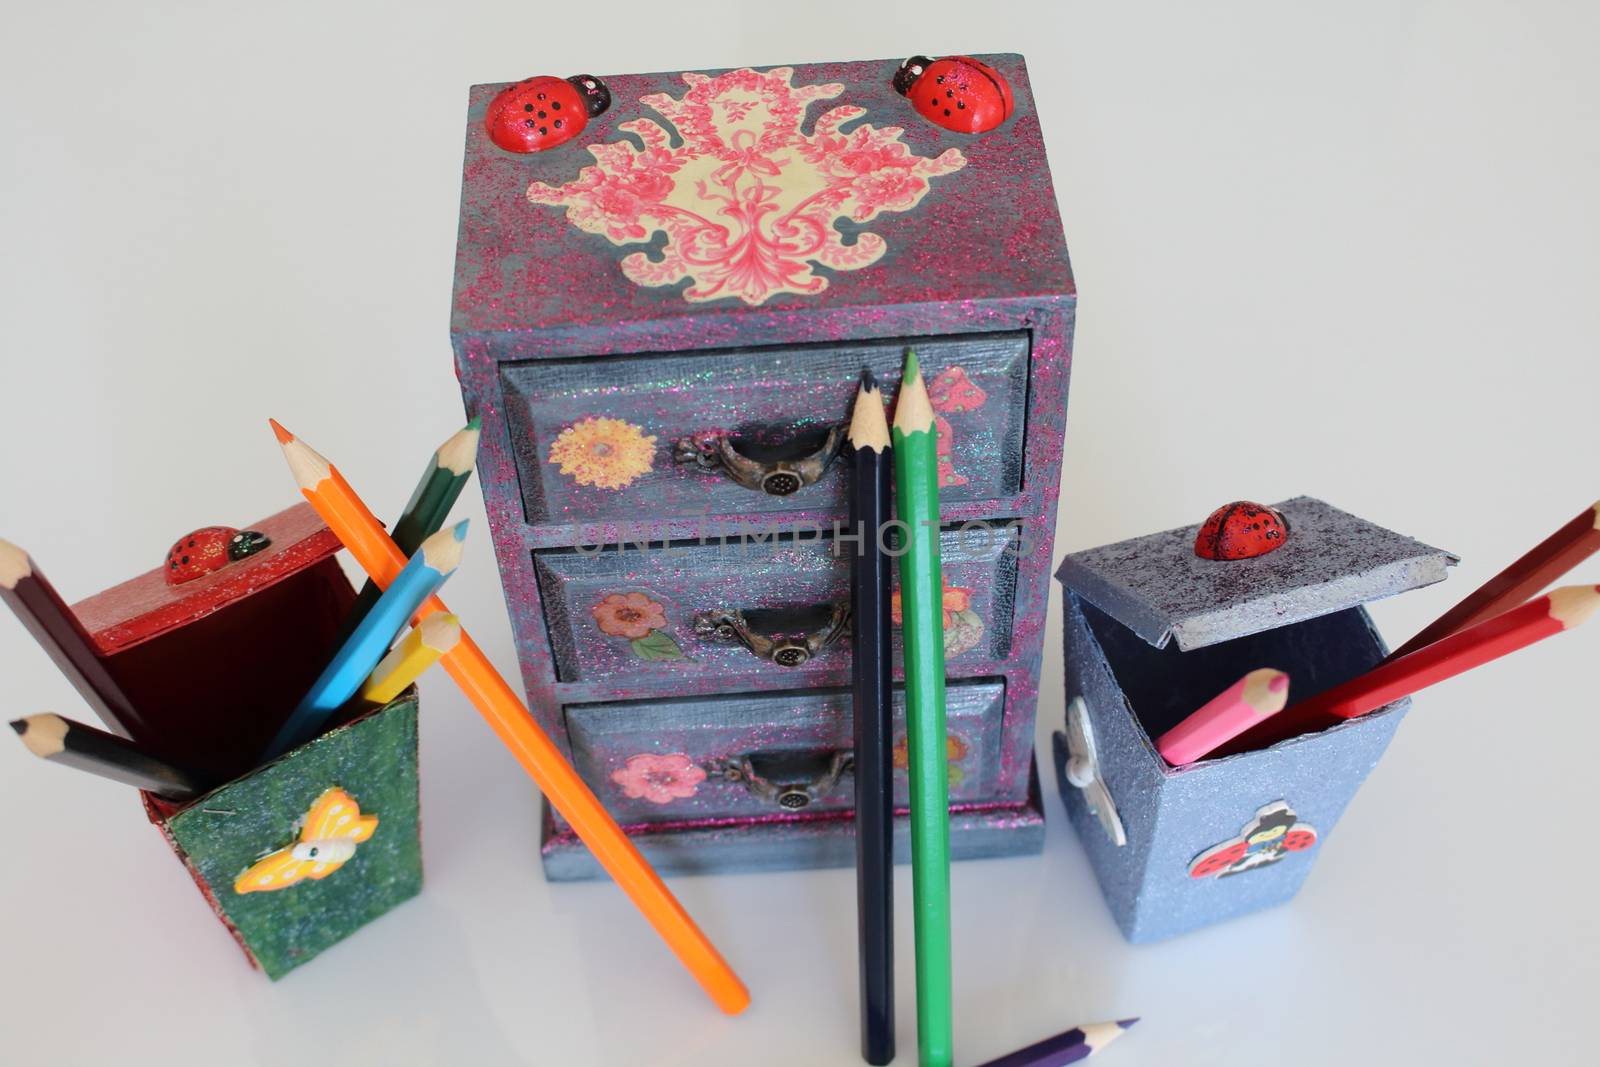 A handmade mini chest of three drawers decoupaged with floral vintage paper, handmade objects decorated using different techniques of decoupage